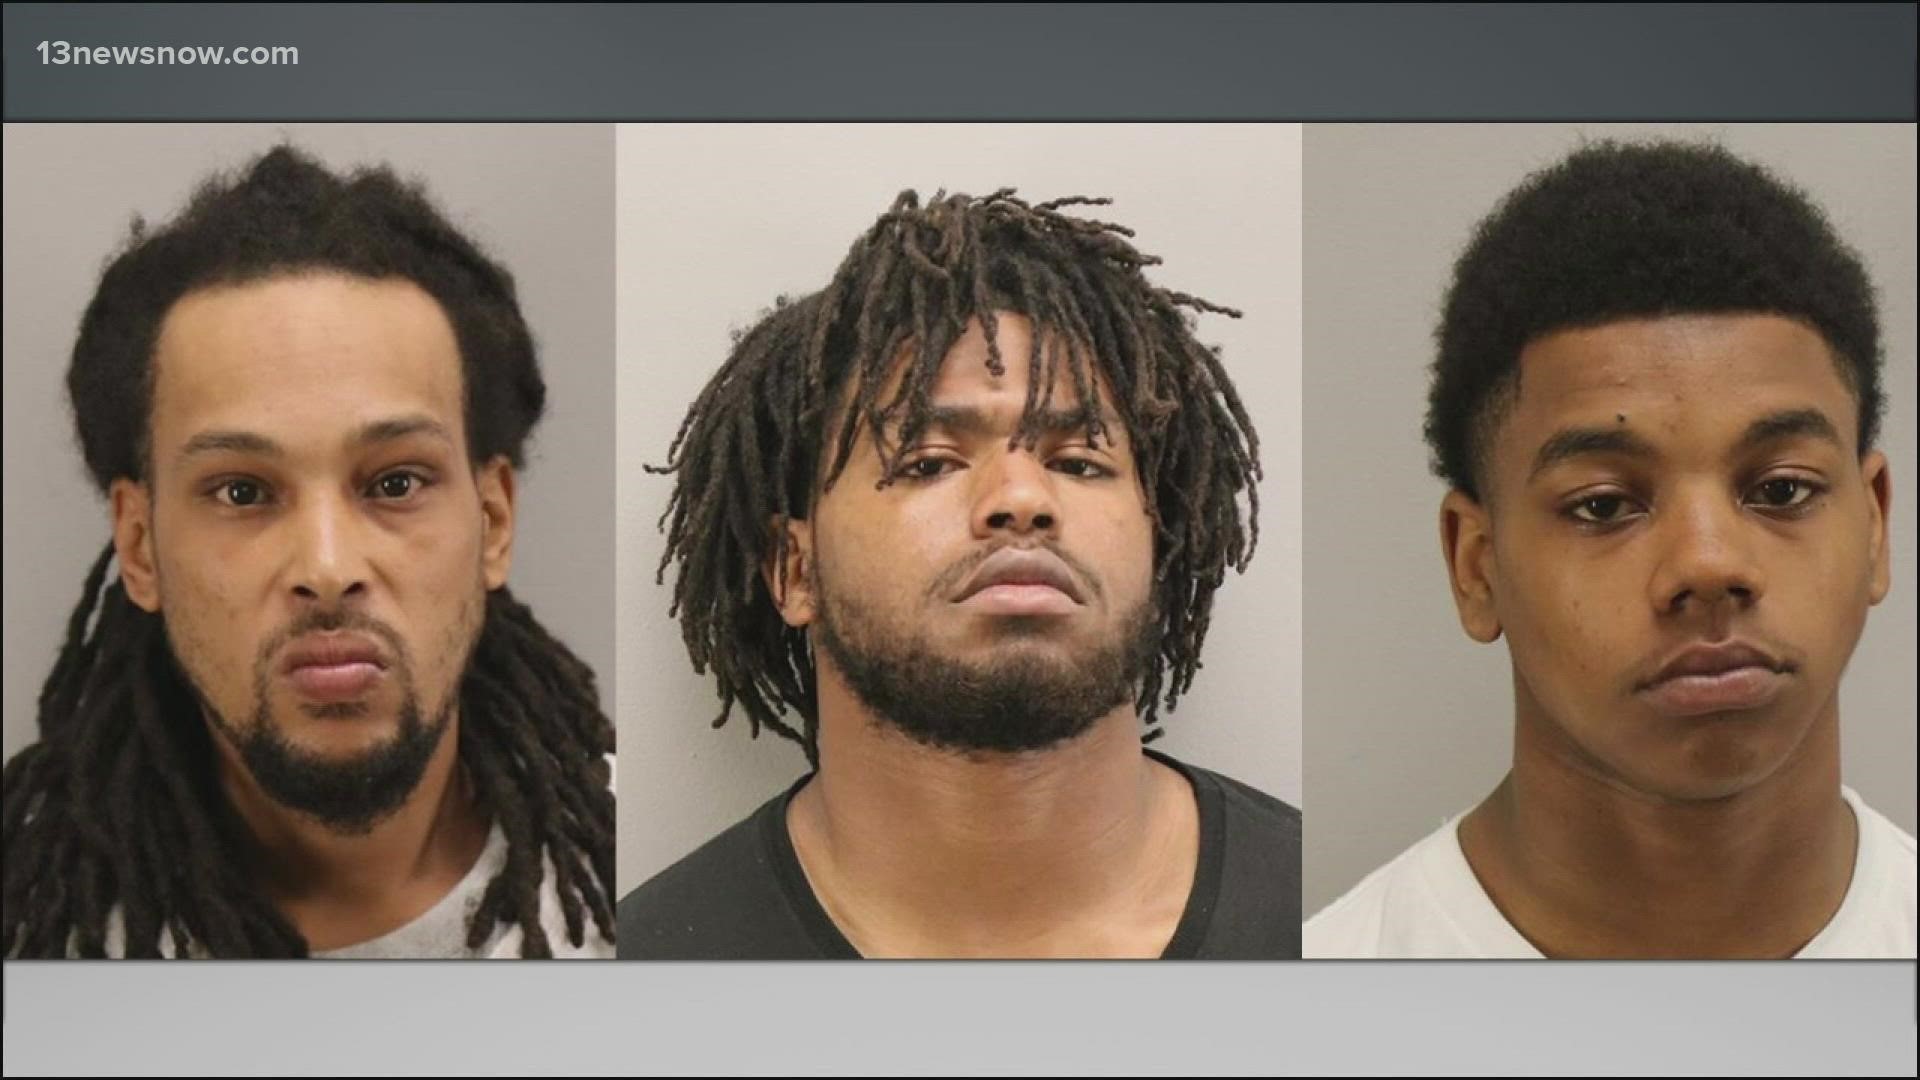 Three men charged in connection to the shootings at the Virginia Beach Oceanfront are now facing federal charges.